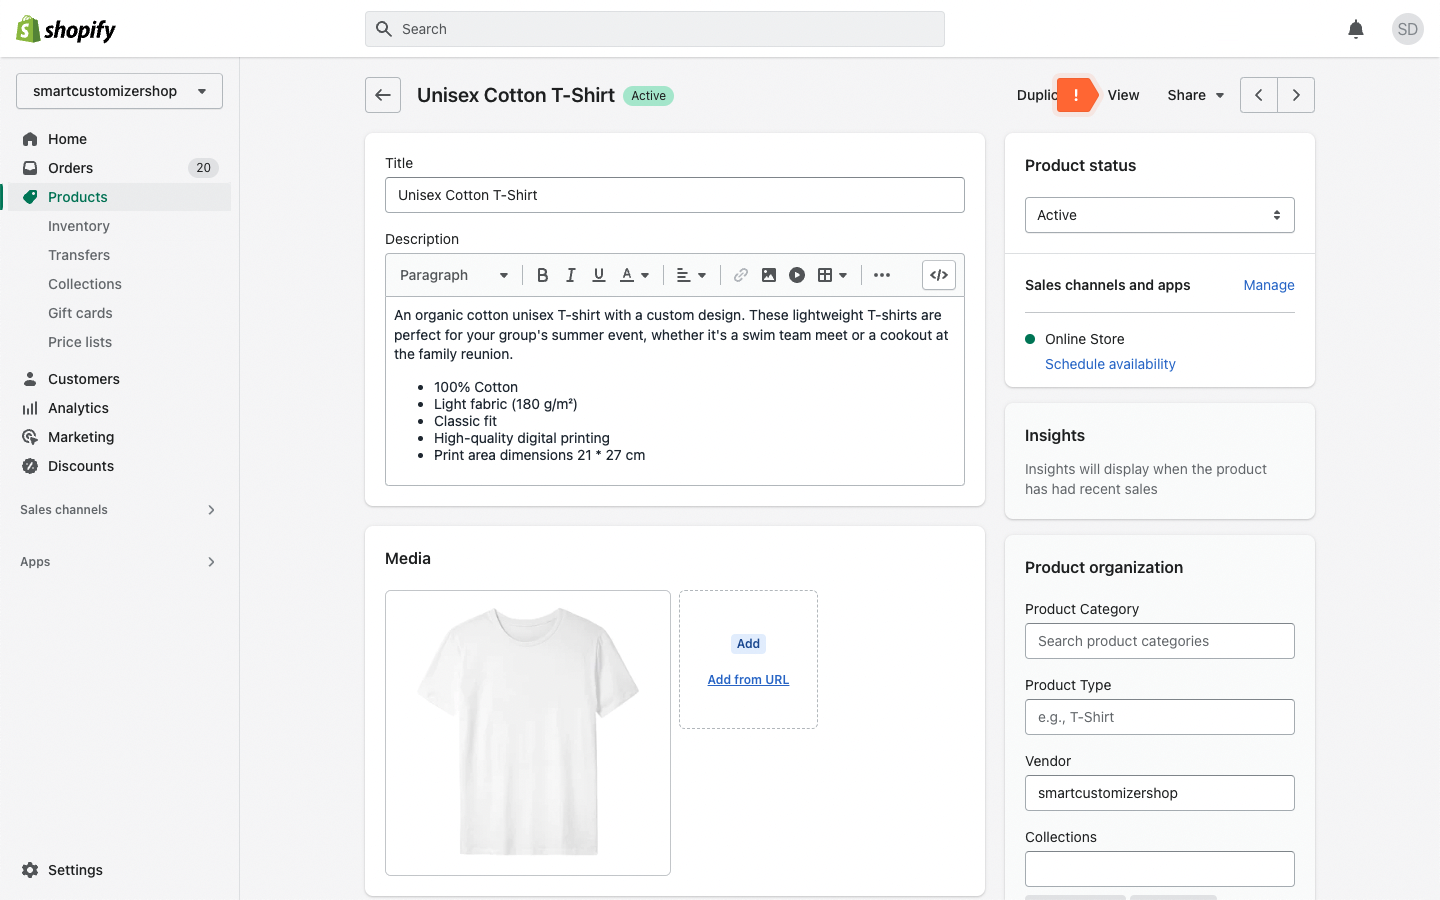 Editing product information in your Shopify store